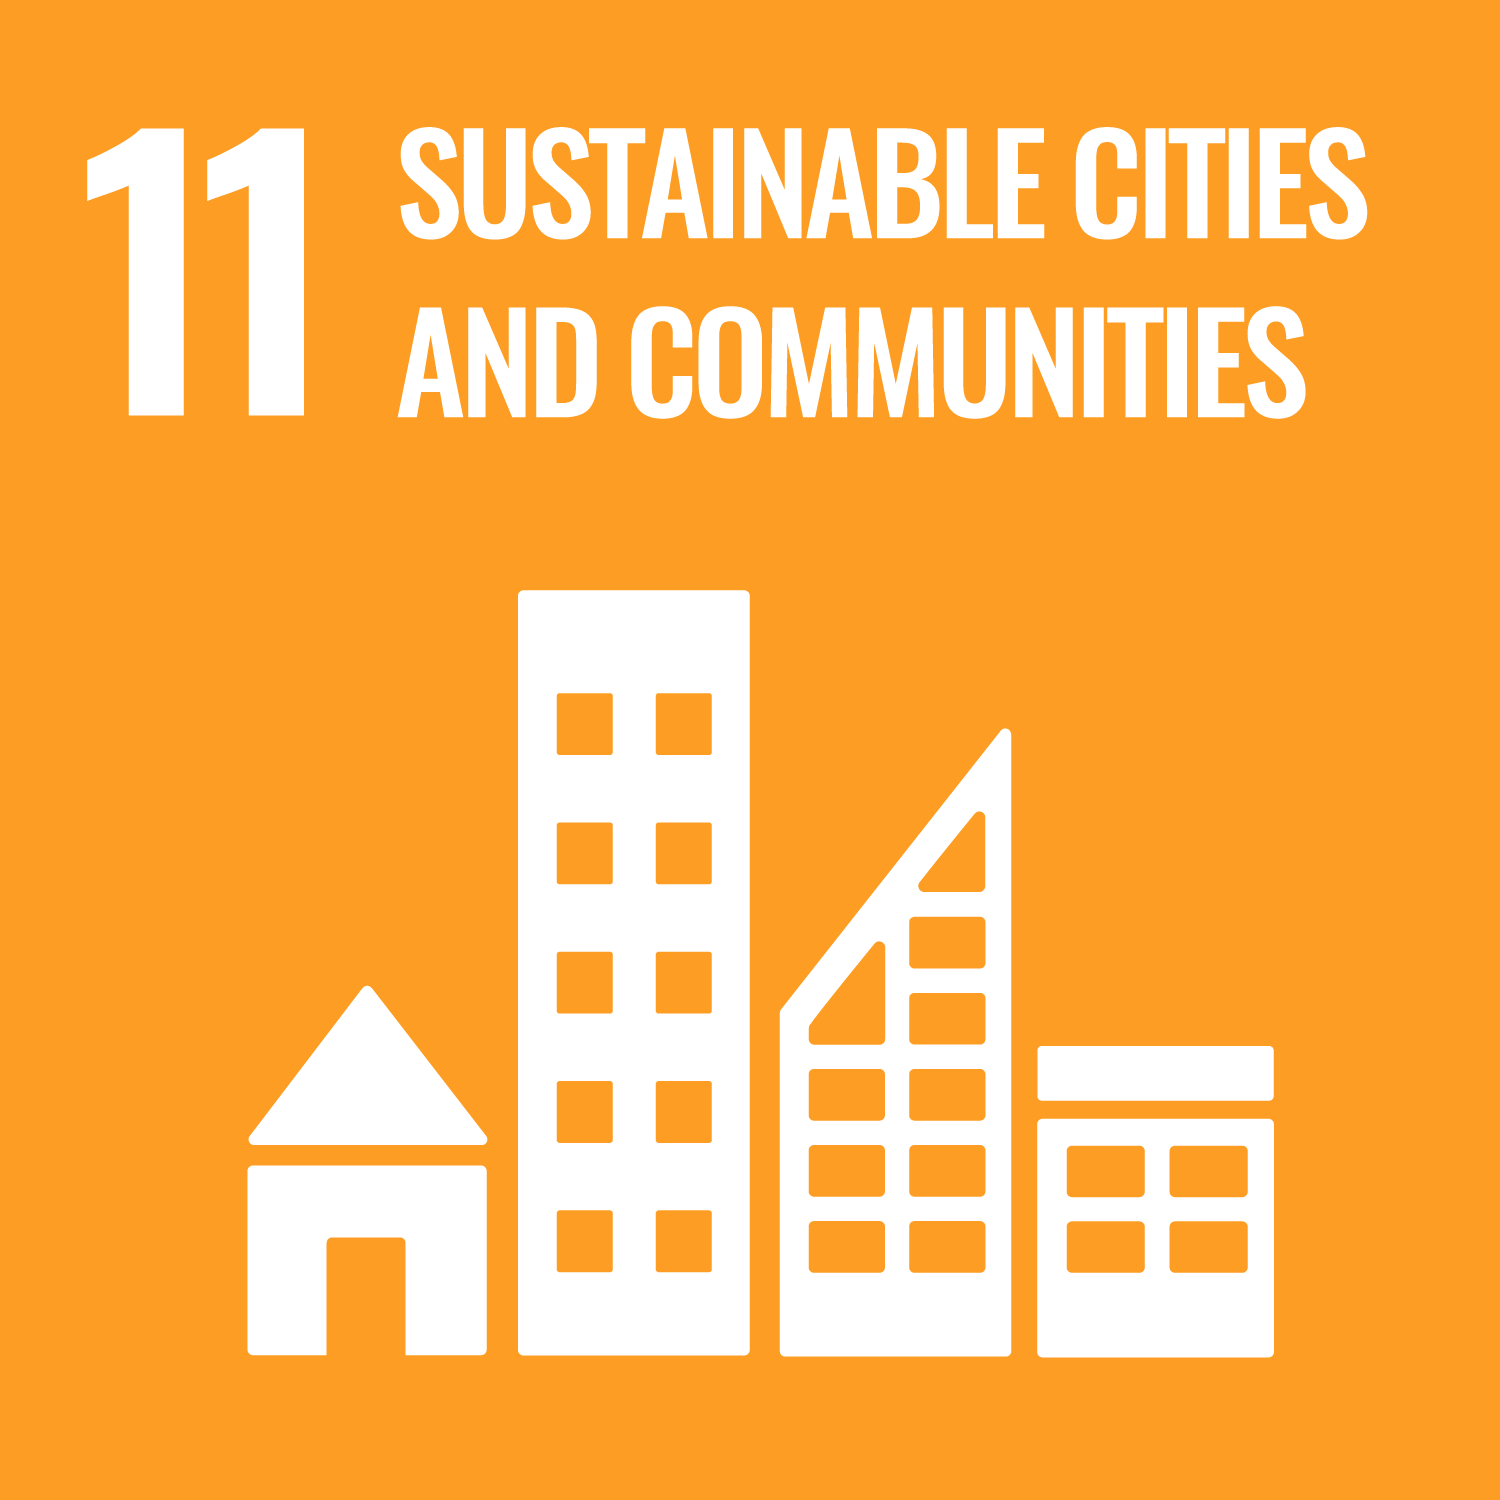 Sustainable Cities and Communities SDG Graphic